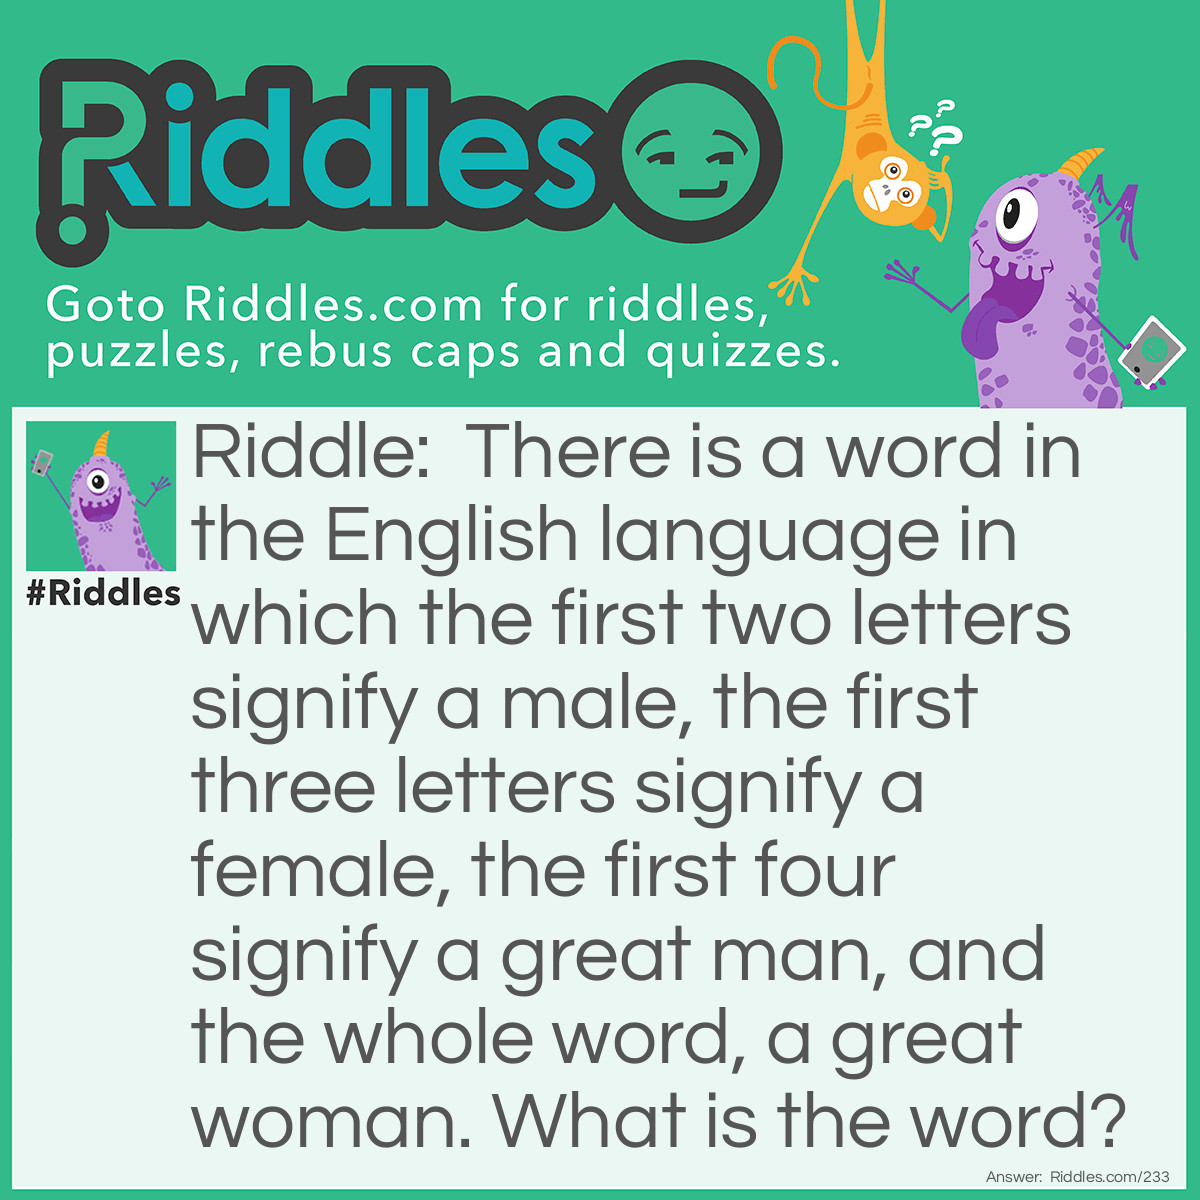 Riddle: There is a word in the English language in which the first two letters signify a male, the first three letters signify a female, the first four signify a great man, and the whole word, a great woman. What is the word? Answer: Heroine.